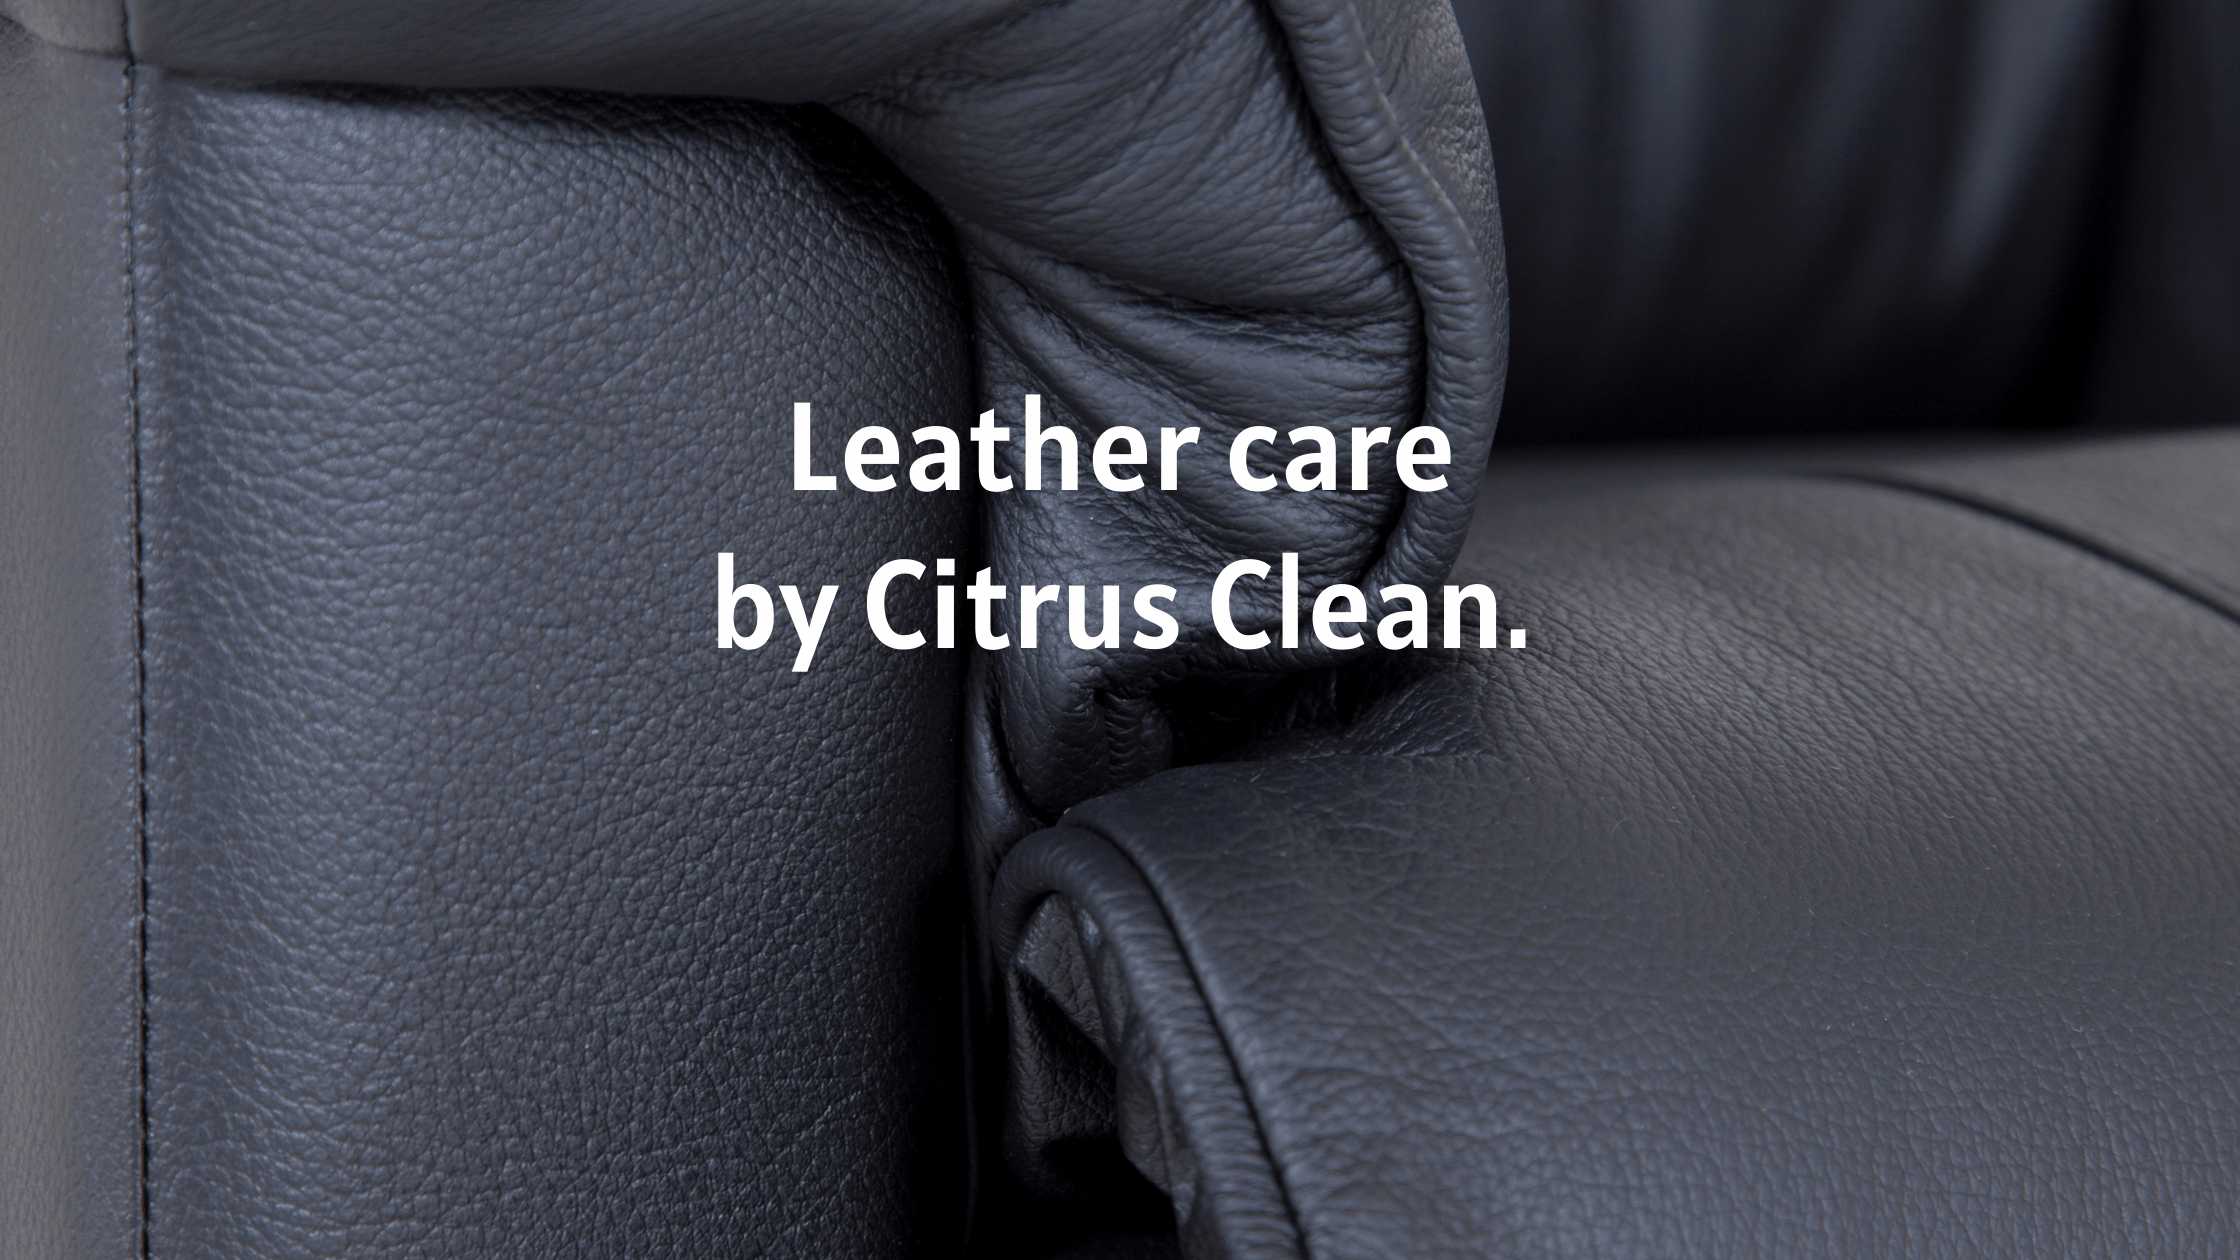 Introducing Leather care by Citrus Clean 3